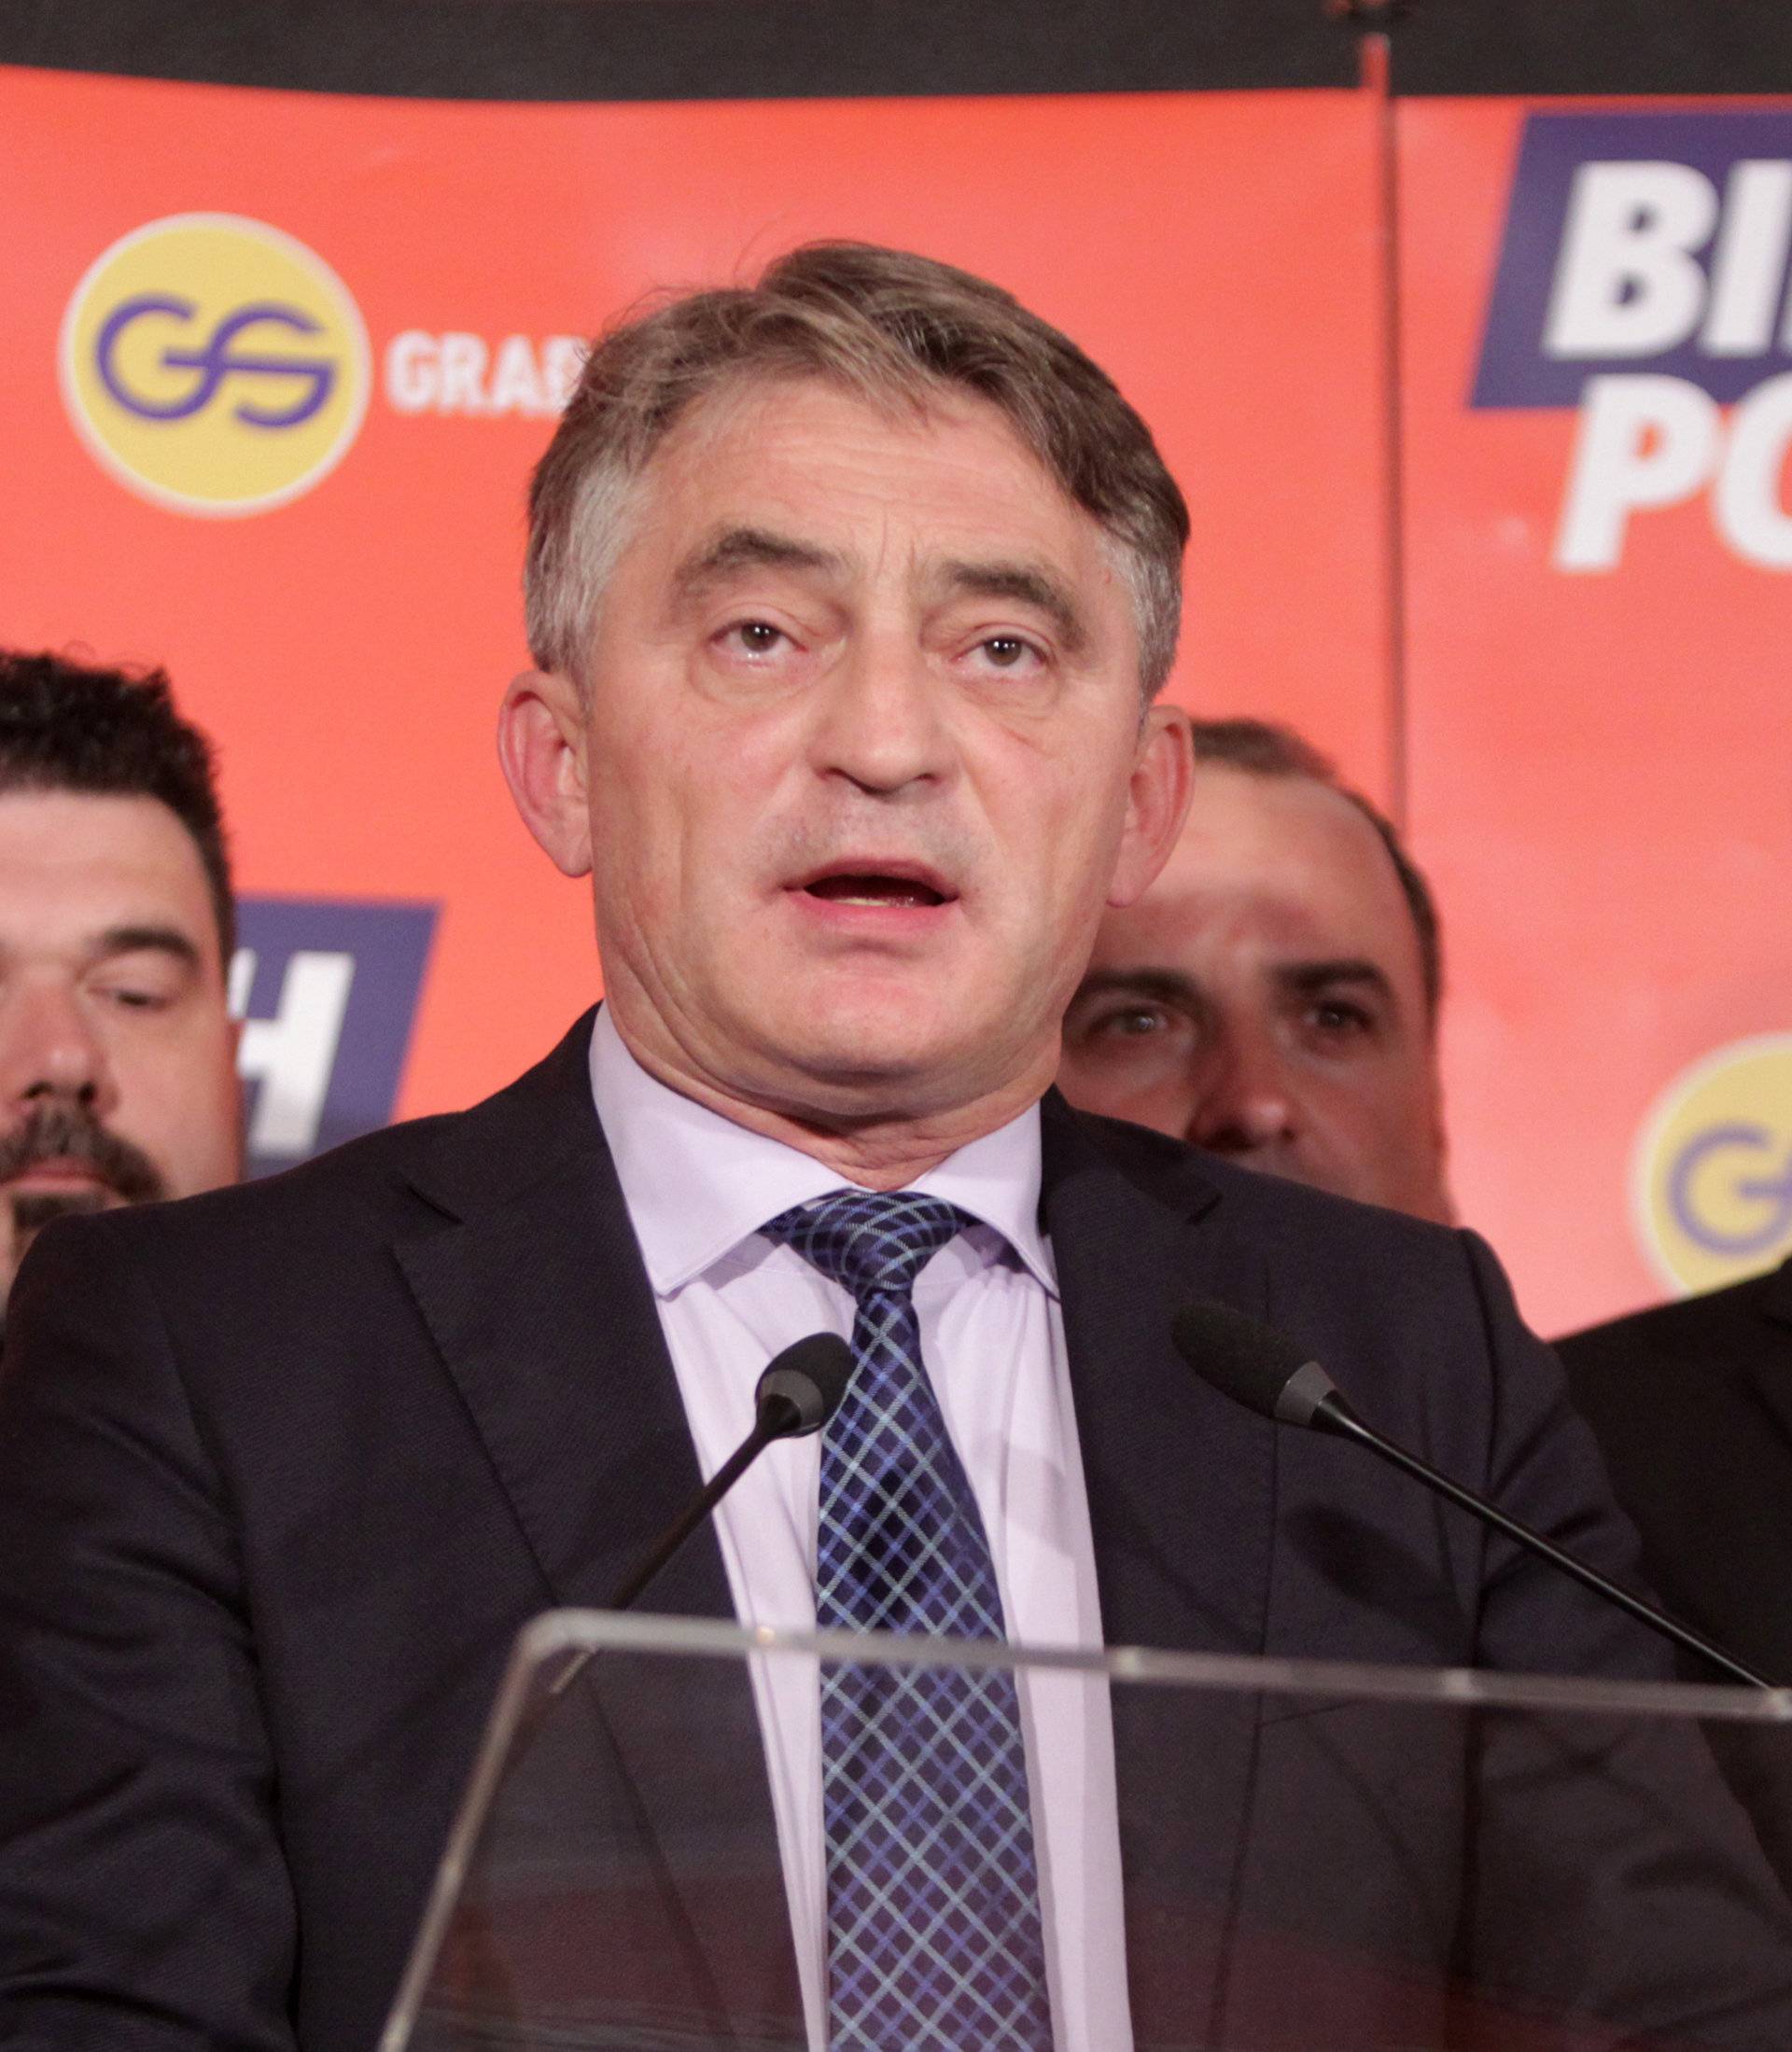 Zeljko Komsic of Democratic Front (DF) attends a news conference where he declared himself the winner of the Croat seat of the Tri-partite Bosnian Presidency in Sarajevo